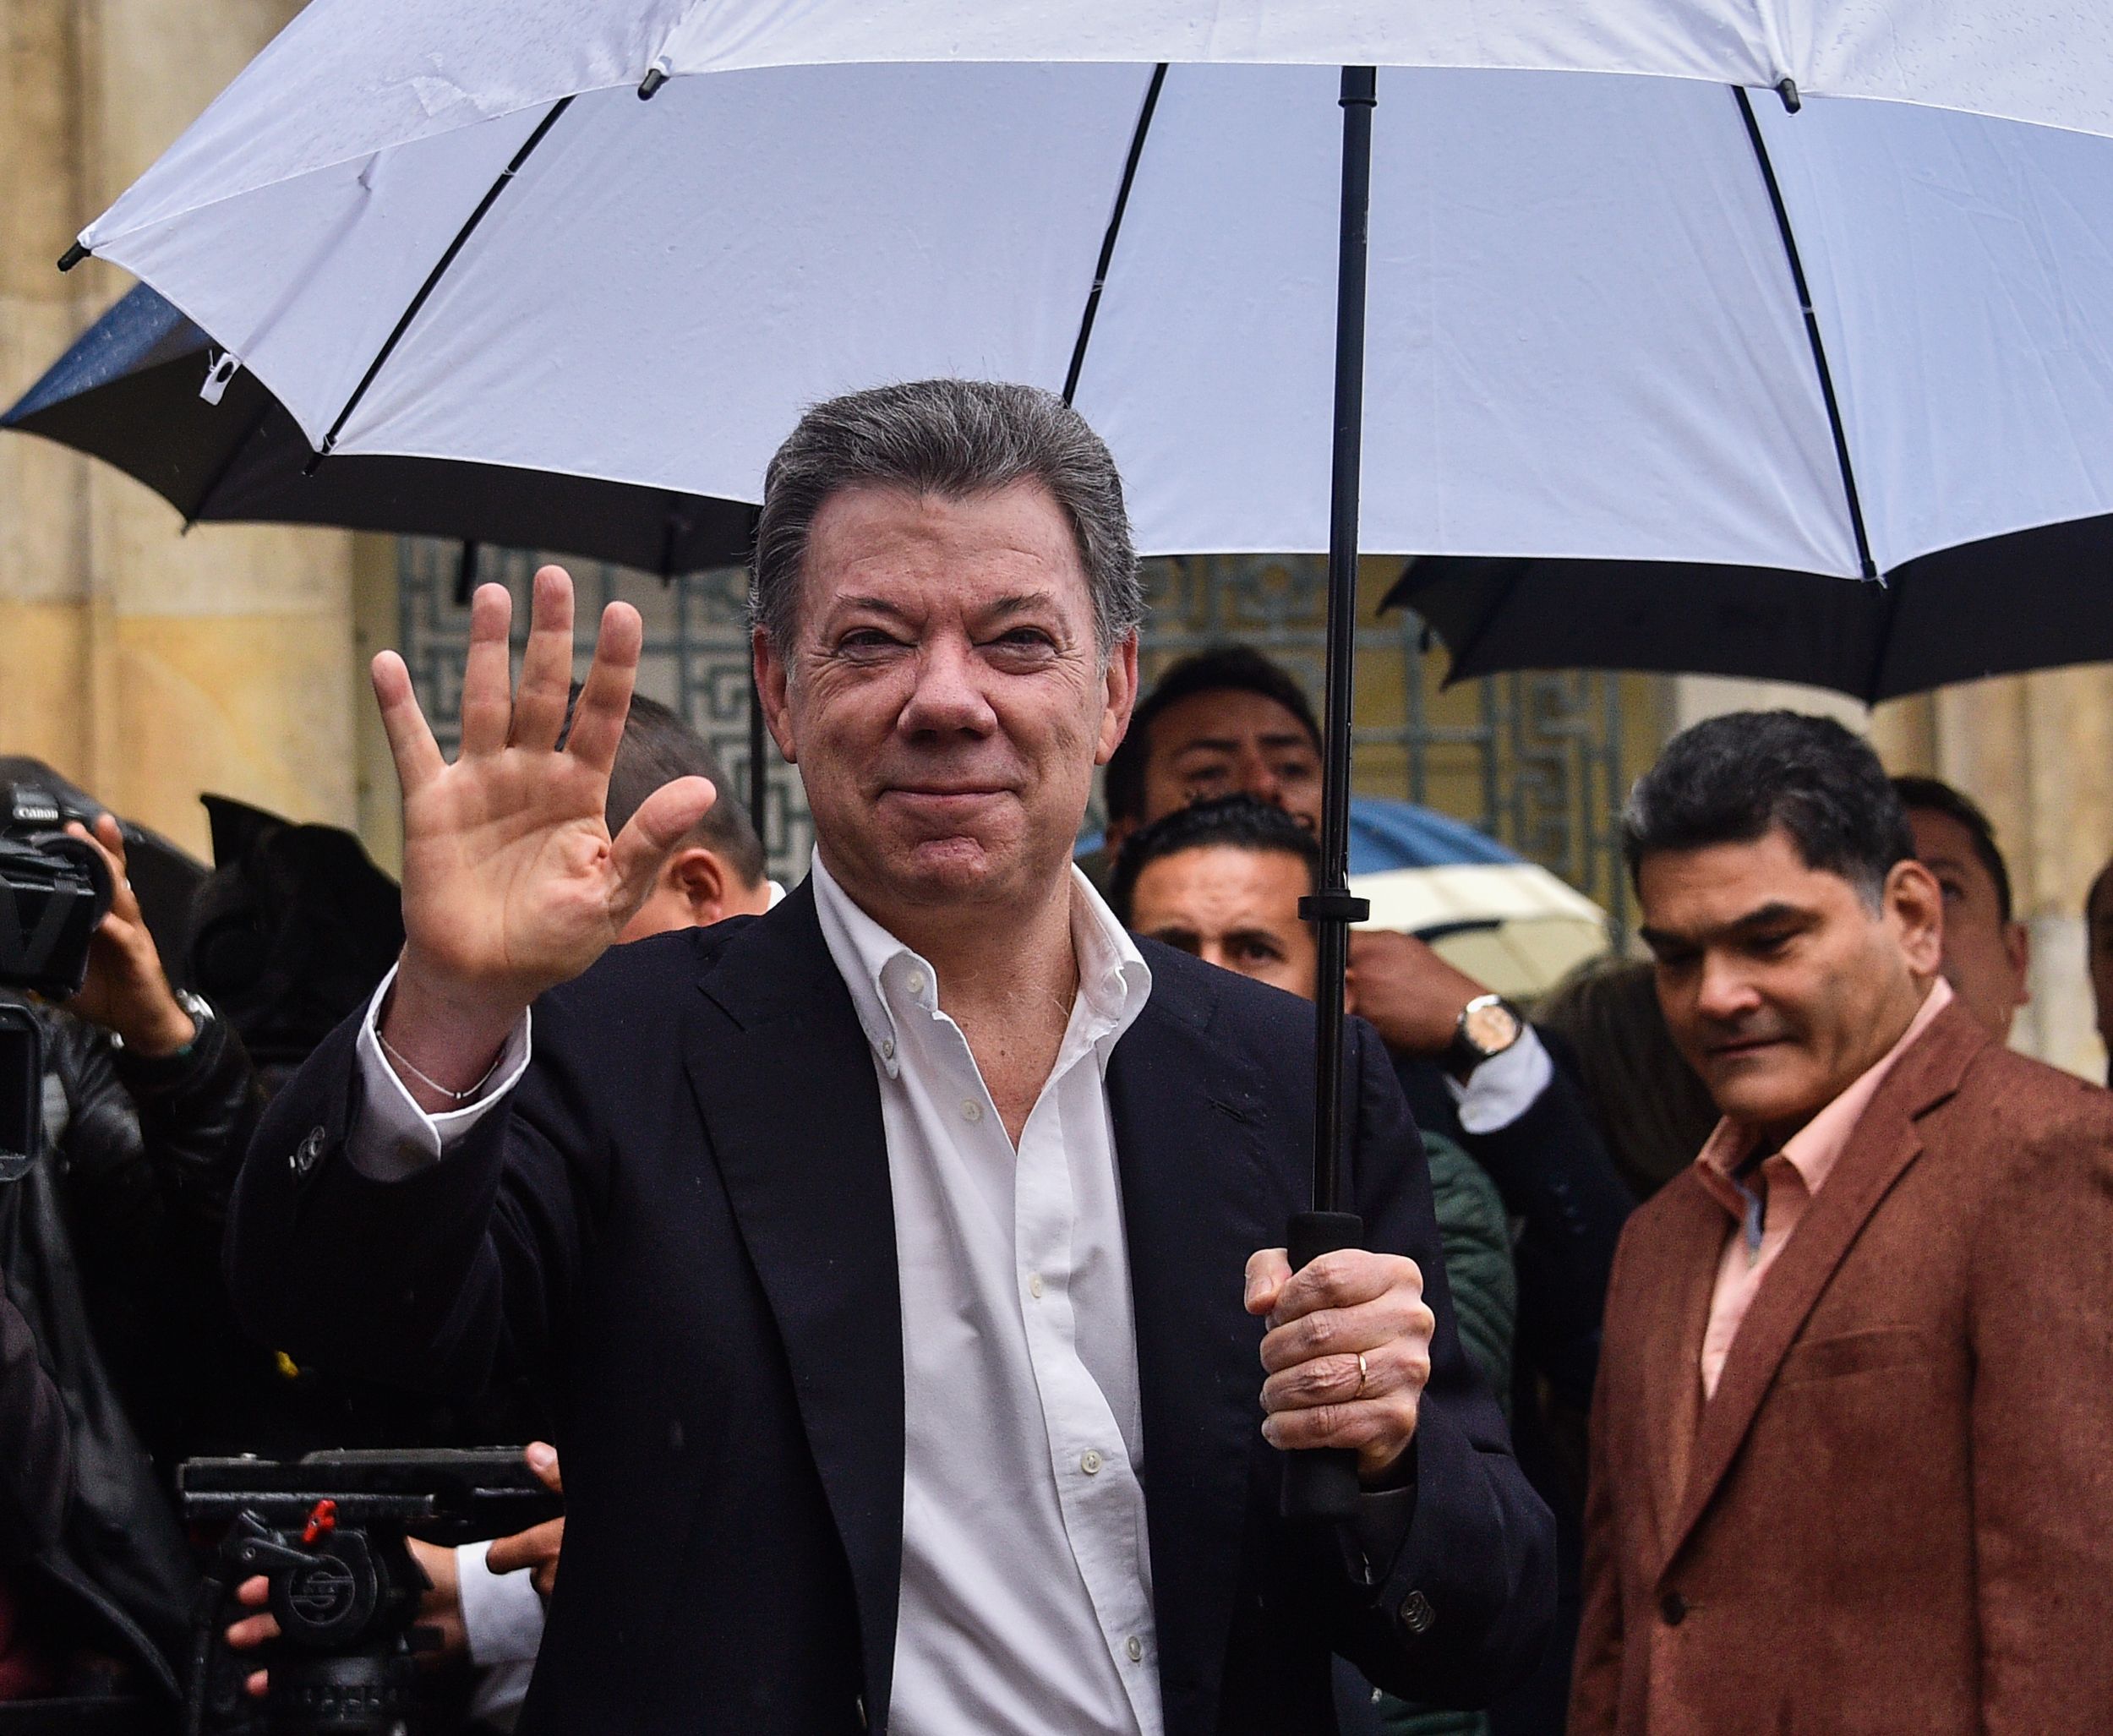 Colombian President Juan Manuel Santos waves after casting his vote during a referendum on whether to ratify a historic peace accord to end a 52-year war between the state and the communist FARC rebels, in Bogota on October 2, 2016. (GUILLERMO LEGARIA—AFP/Getty Images)